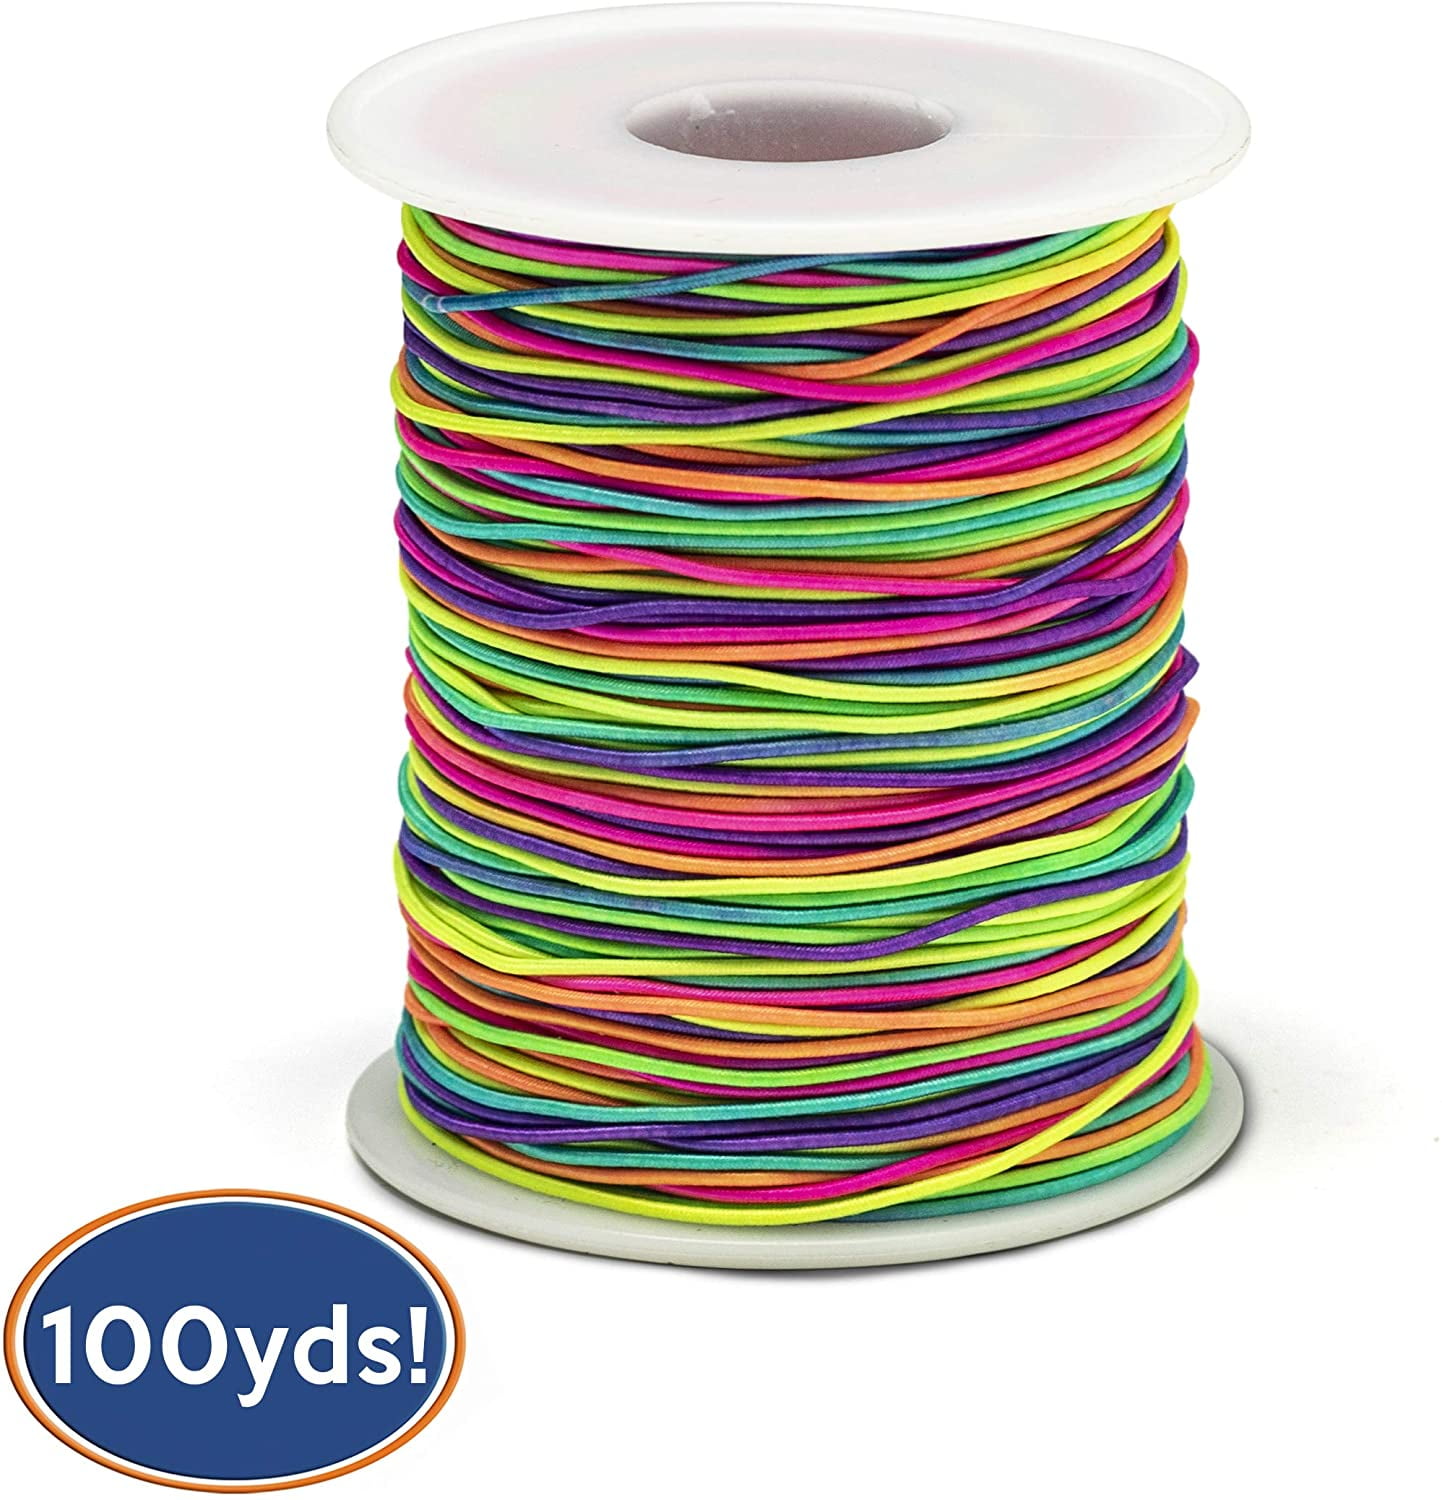 1 Roll 80yards Elastic Strong Stretchy Beading Thread Cord Bracelet String 0.8mm 